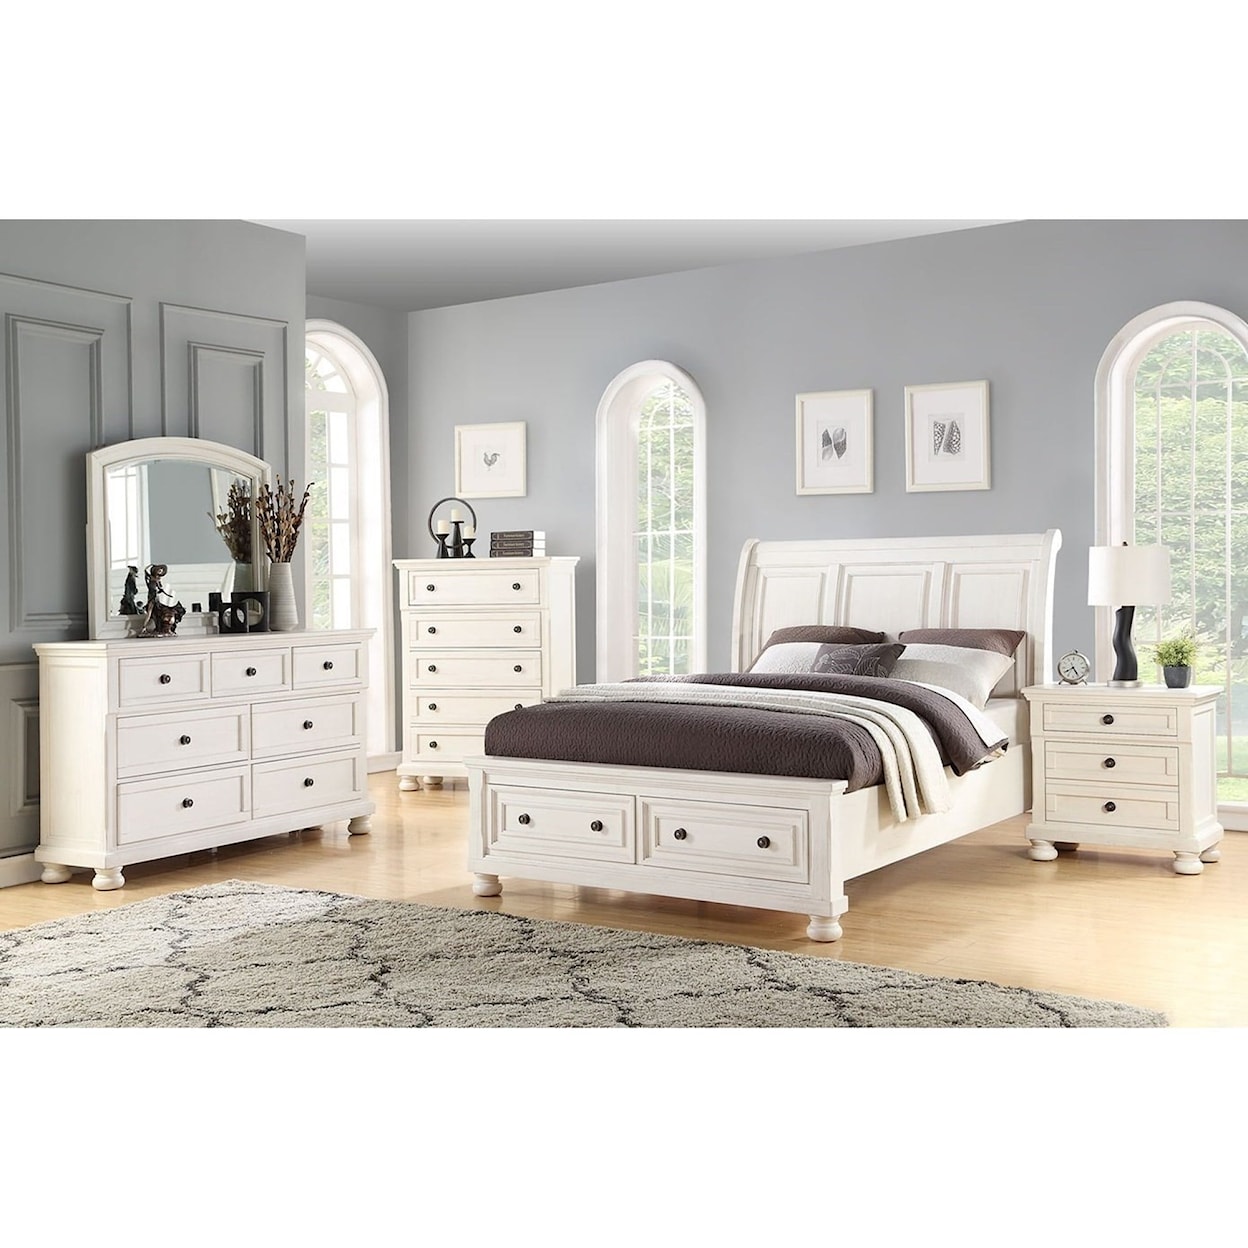 Avalon Furniture Stella B01163 White Queen 7pc Bedroom group